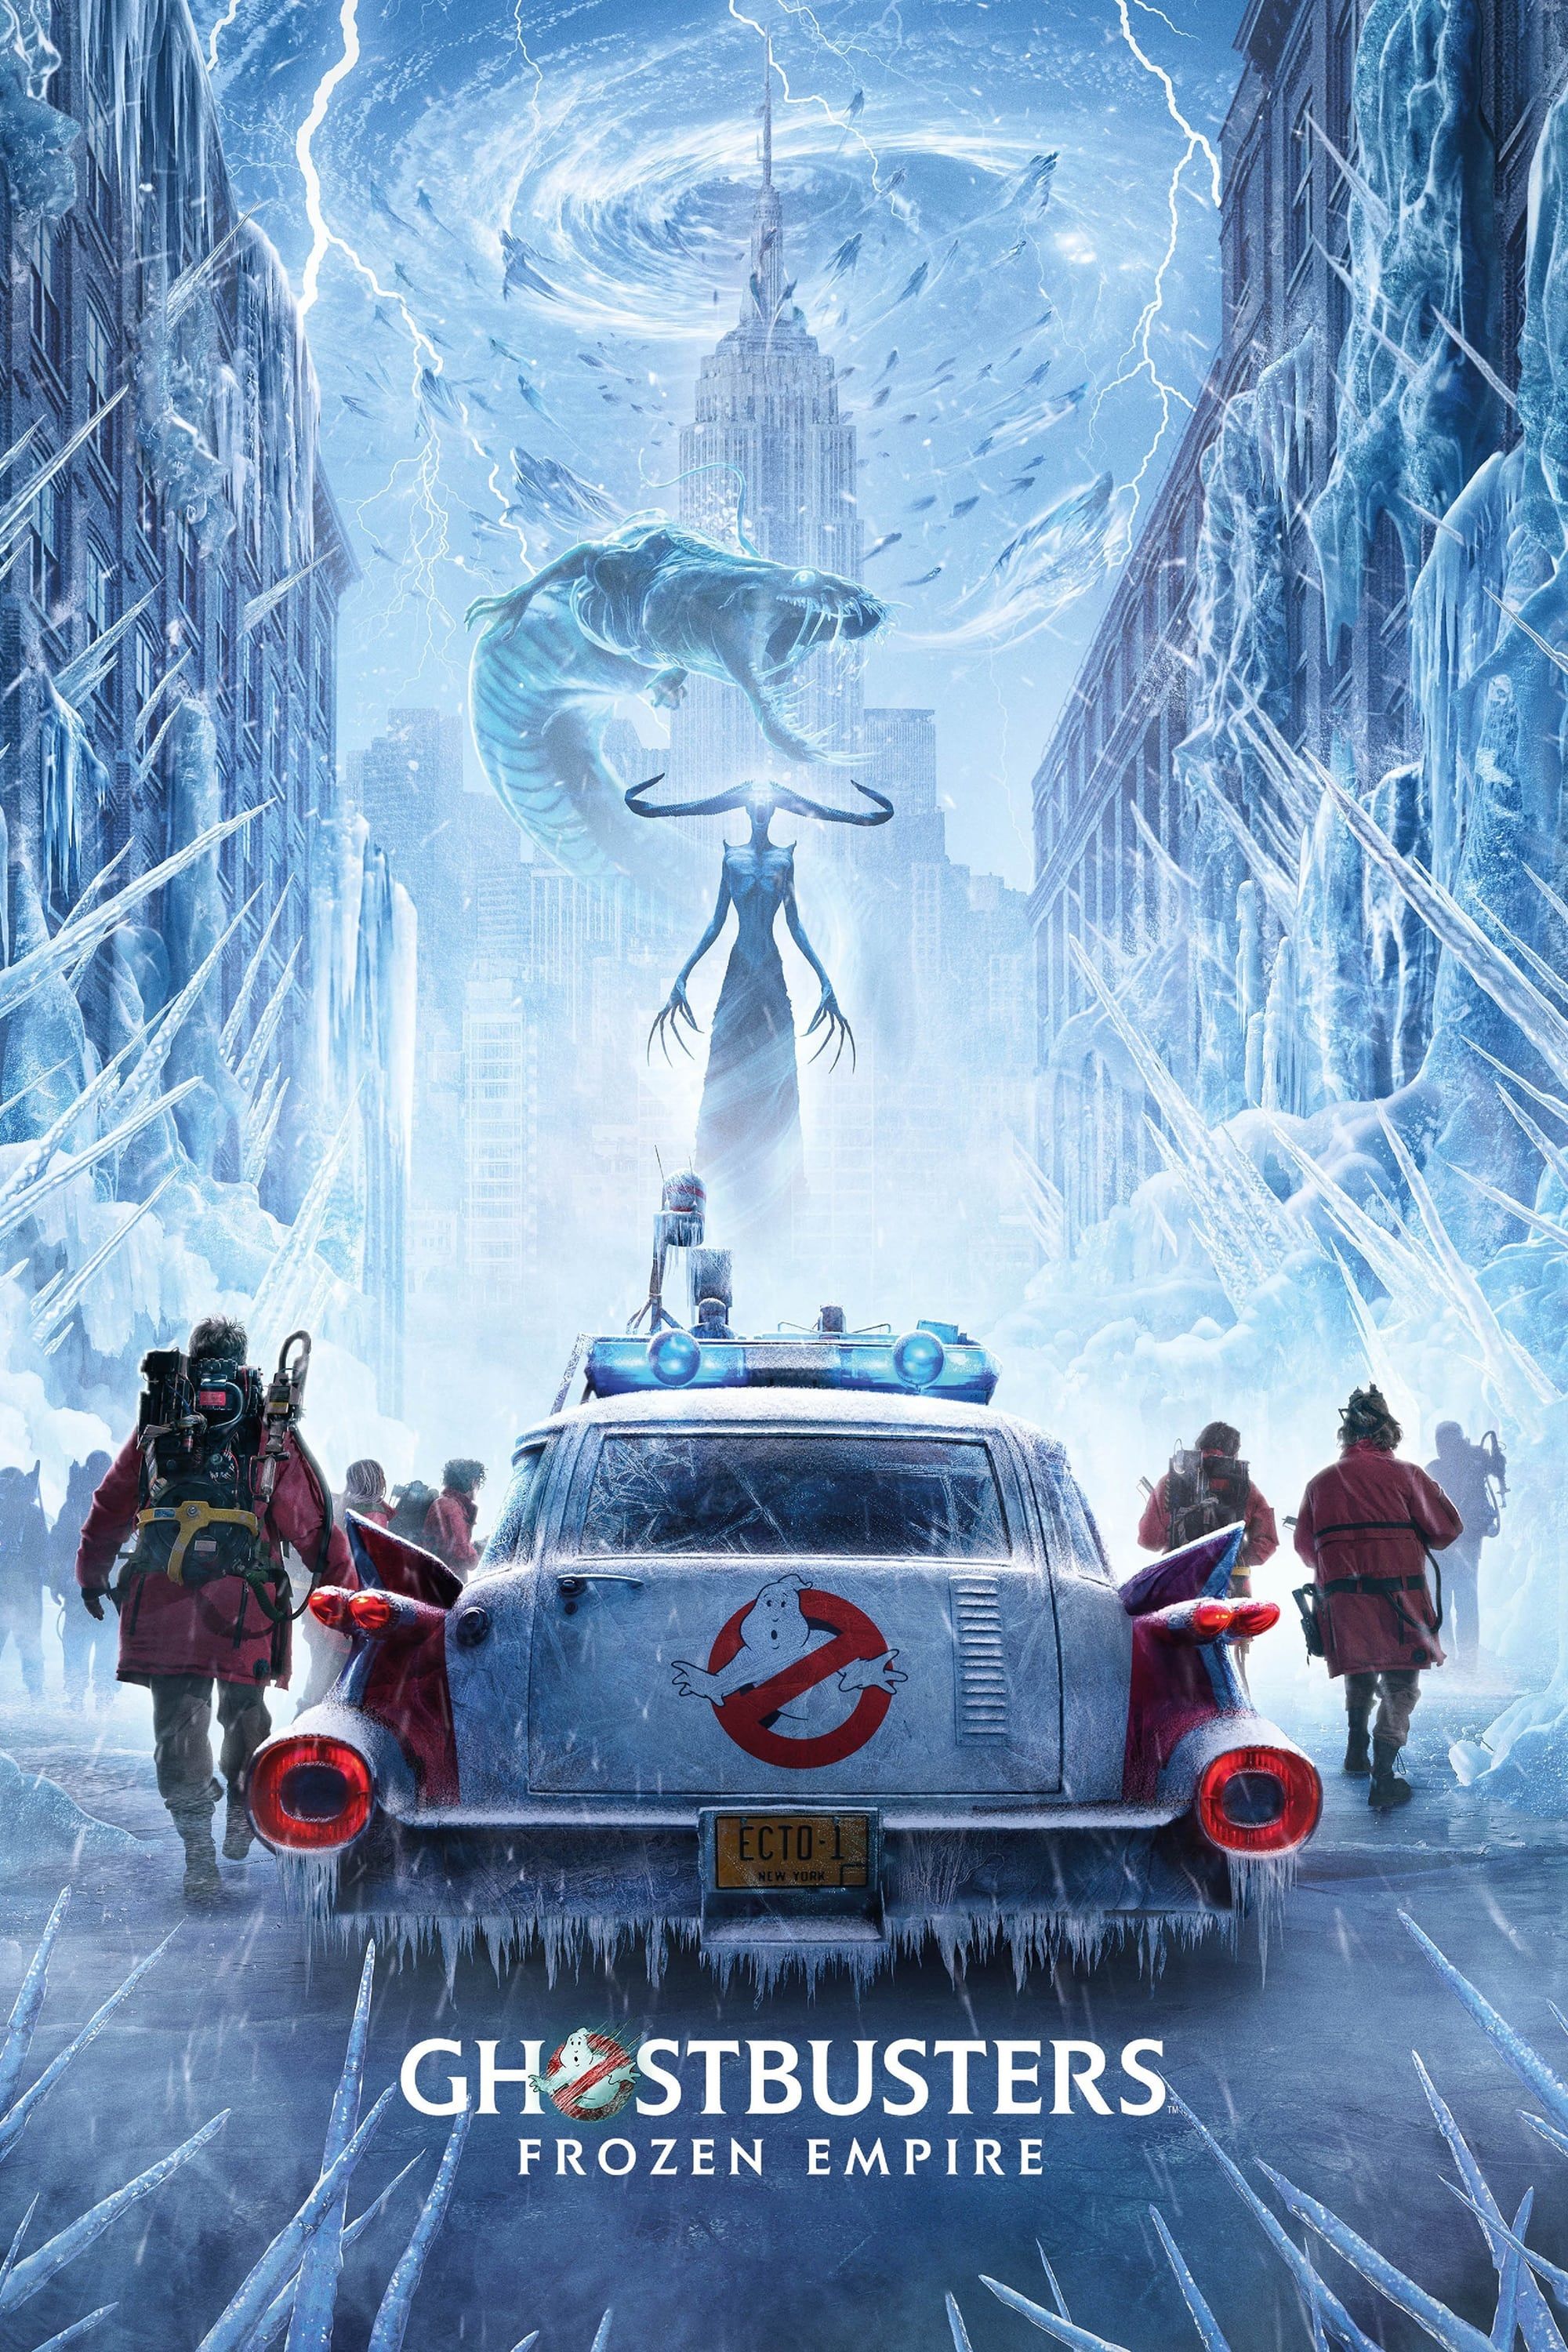 Ghostbusters Frozen Empire Poster Featuring the Crew Steppingout of Ecto 1 and Facing Ice Creatures in New York